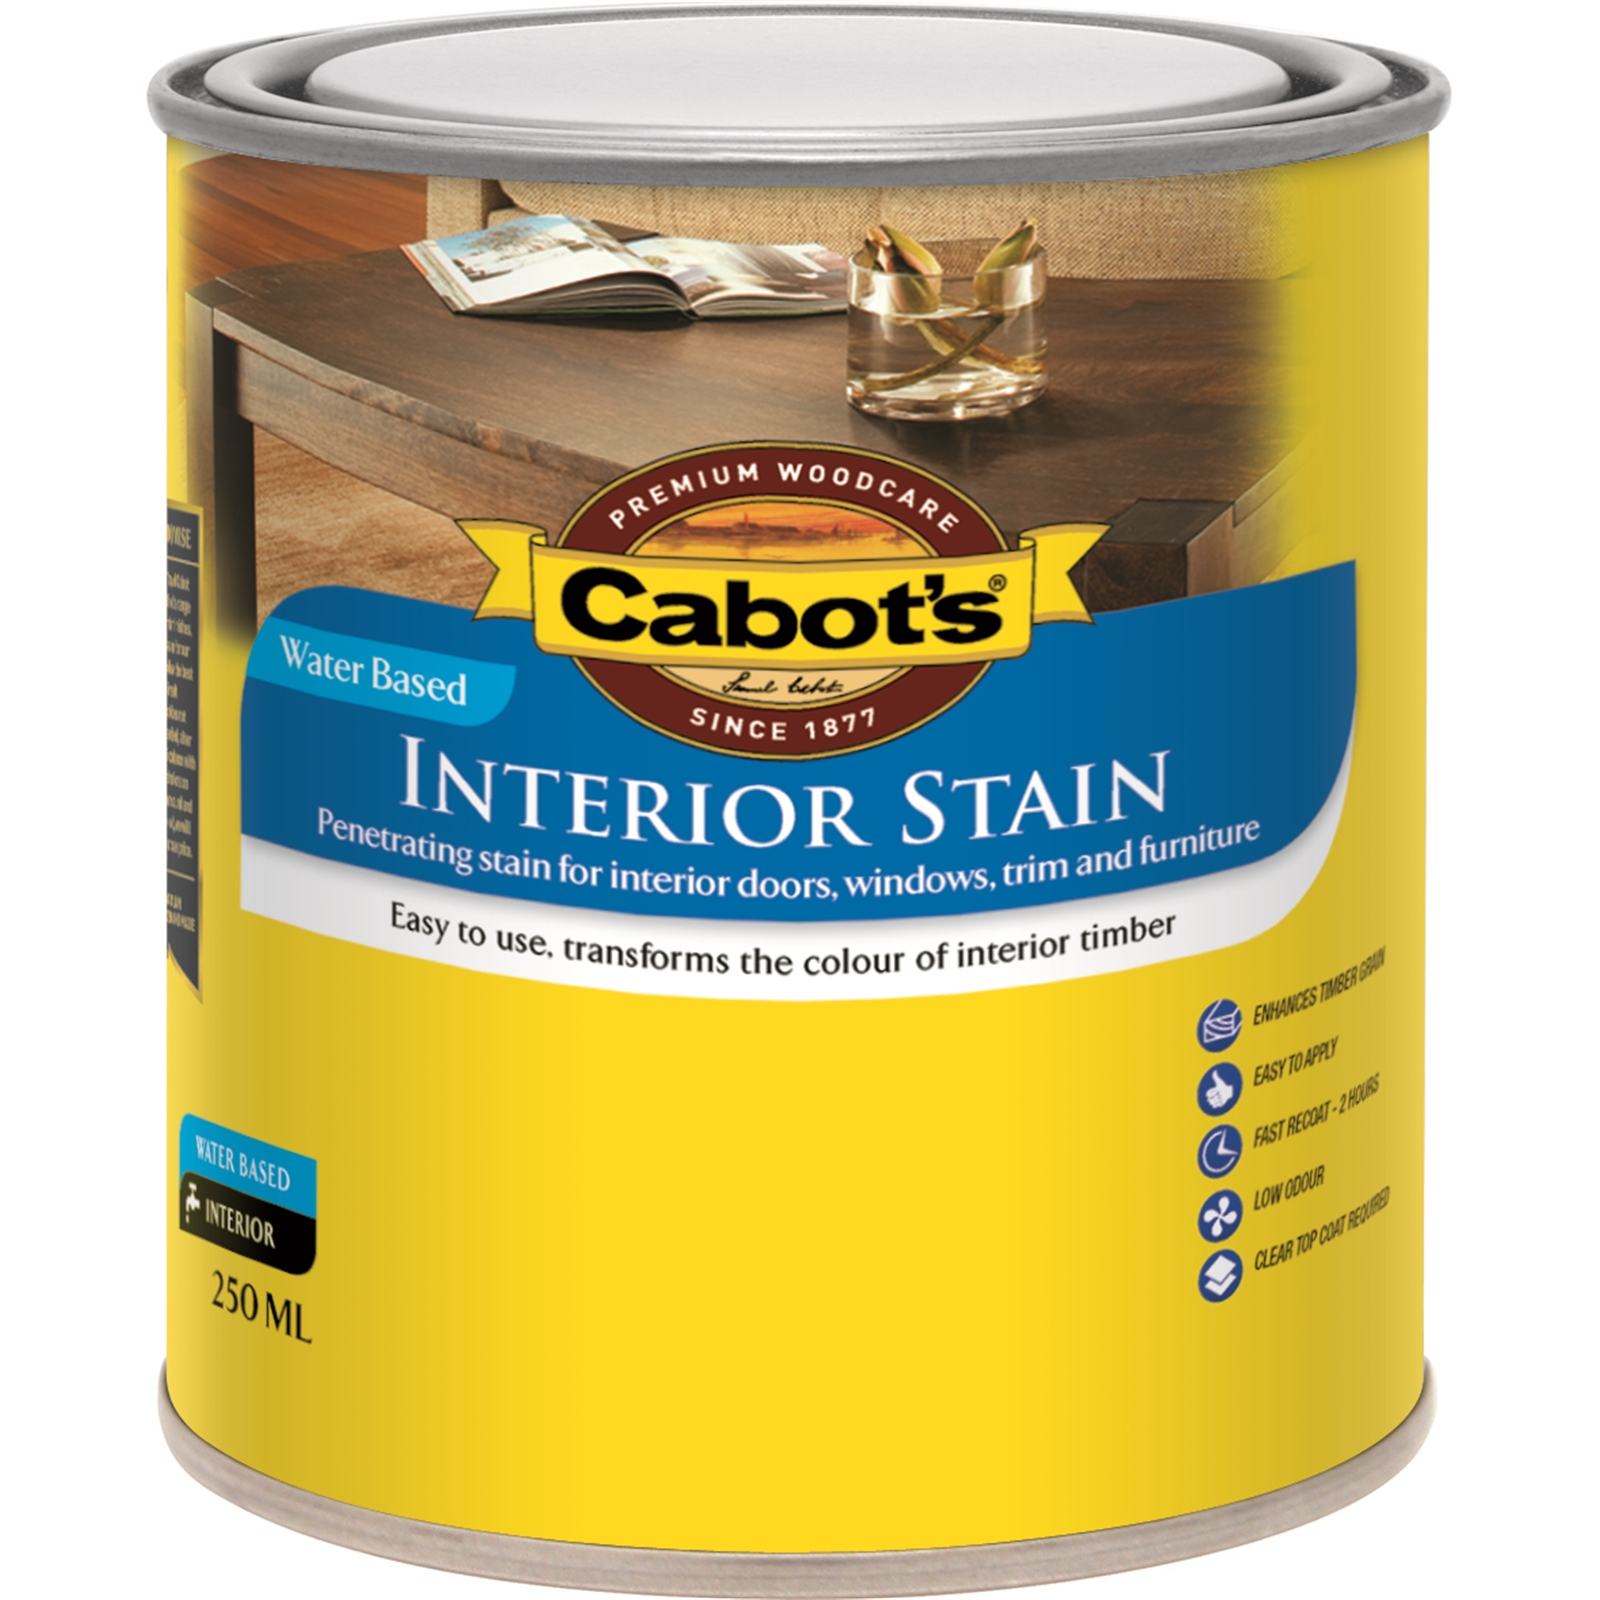 Cabot's 250ml Tint Base Water Based Interior Stain